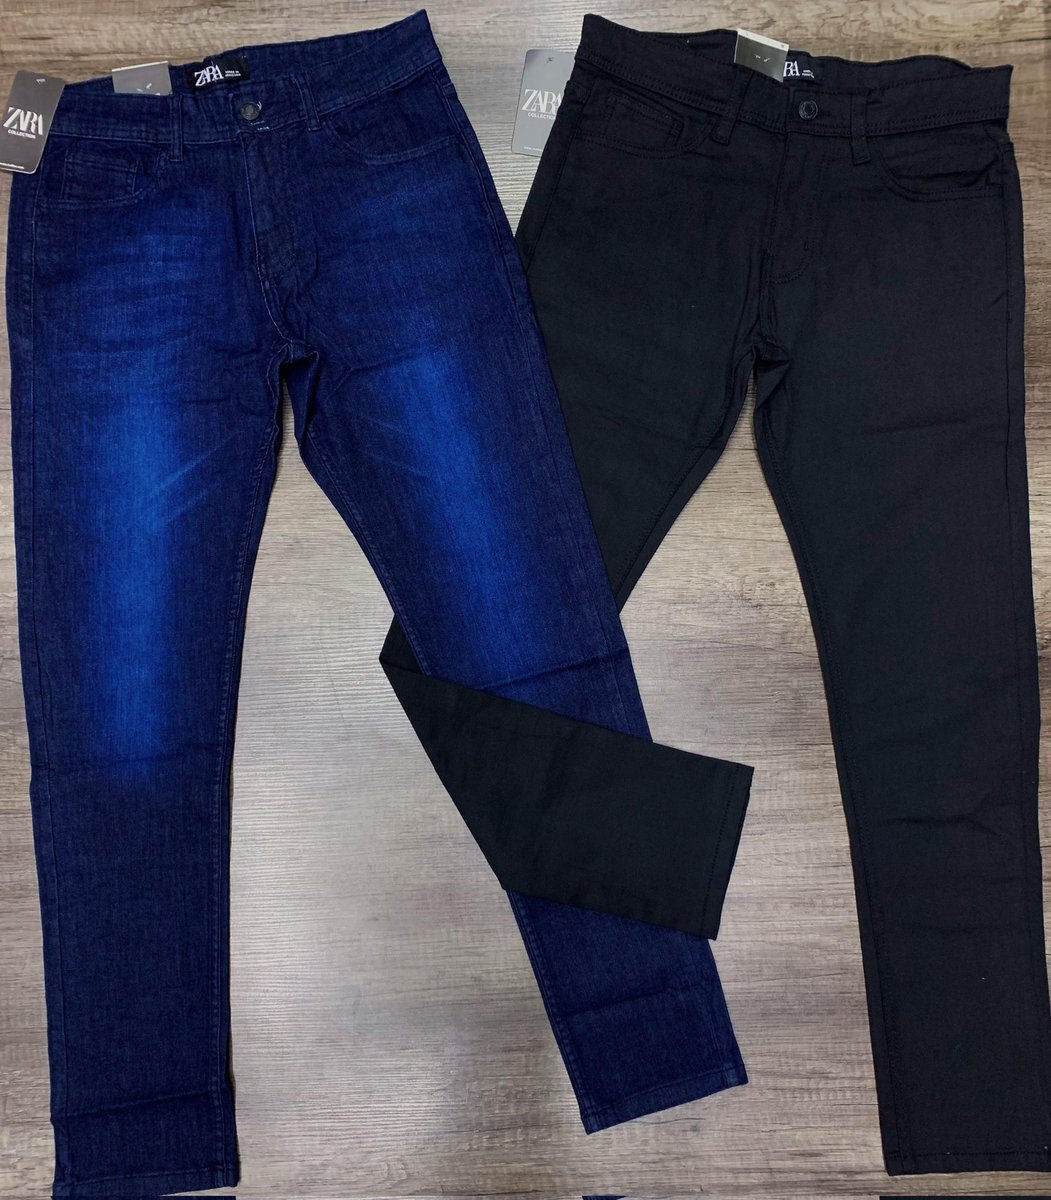 Don't be weird act cool in these Jeans 🛍️🤭🥰
Get both Jeans for ksh 3000
(size 34)
☎️254 721 77 11 08

#LocalElections2024 #LeafsForever #EclipseSolar2024 #bbtvi #cbseresults2024 #RahulGandhi #gntm #r4today #LocalElections